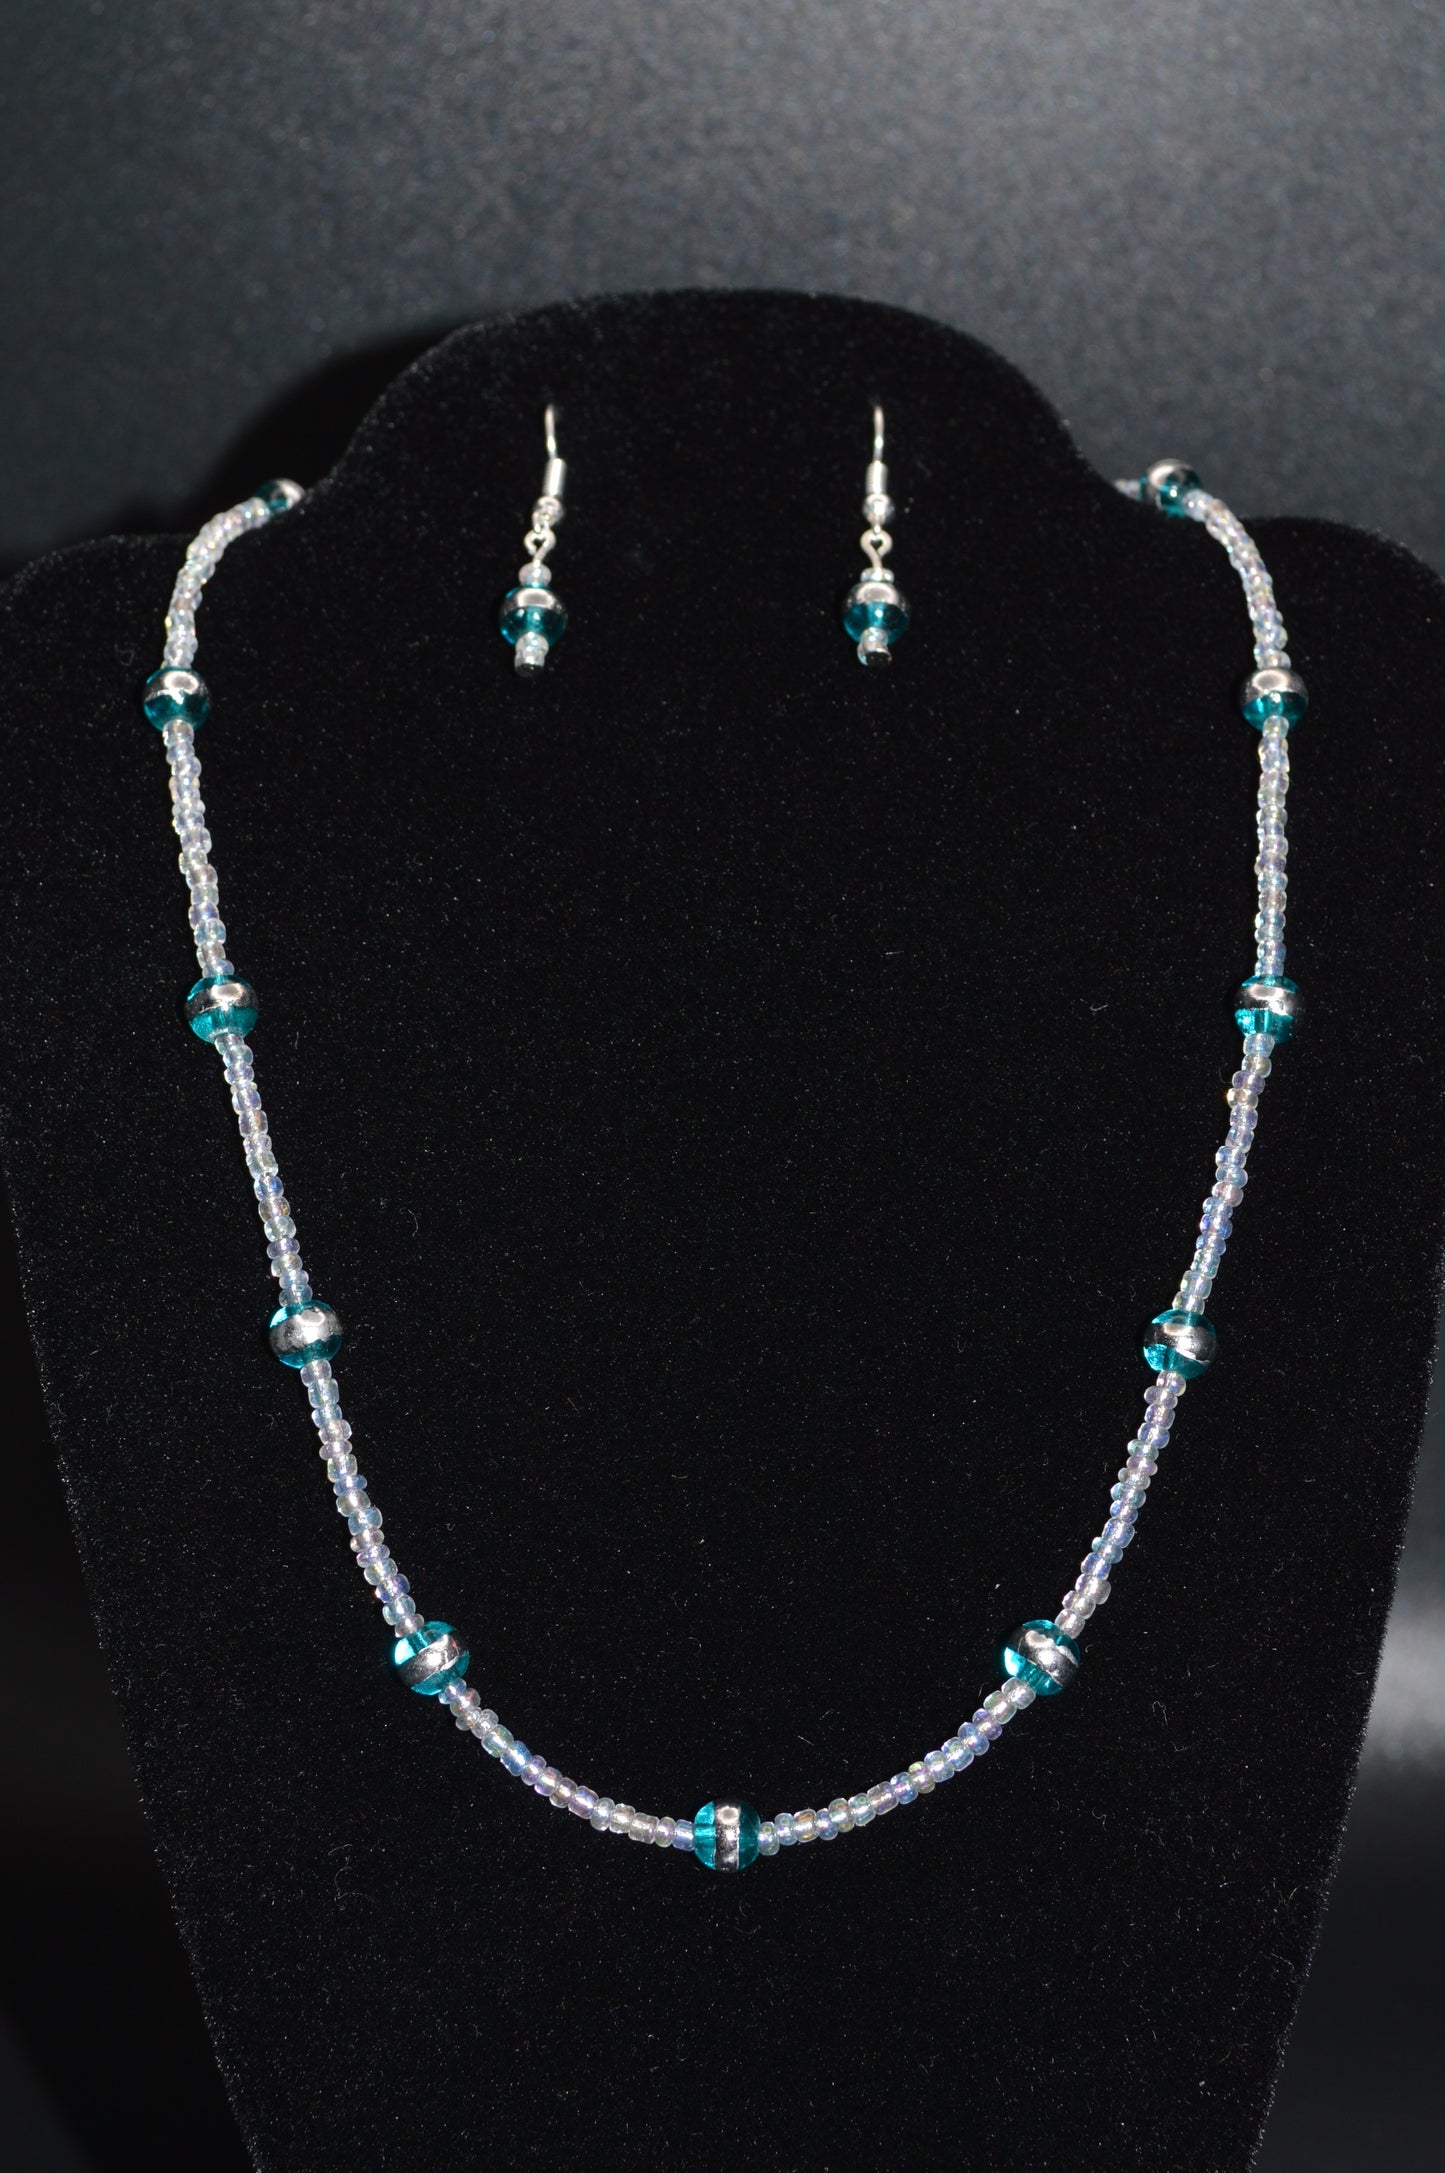 Aqua Silver Striped Glass Beads with Clear Seed Beads Necklace